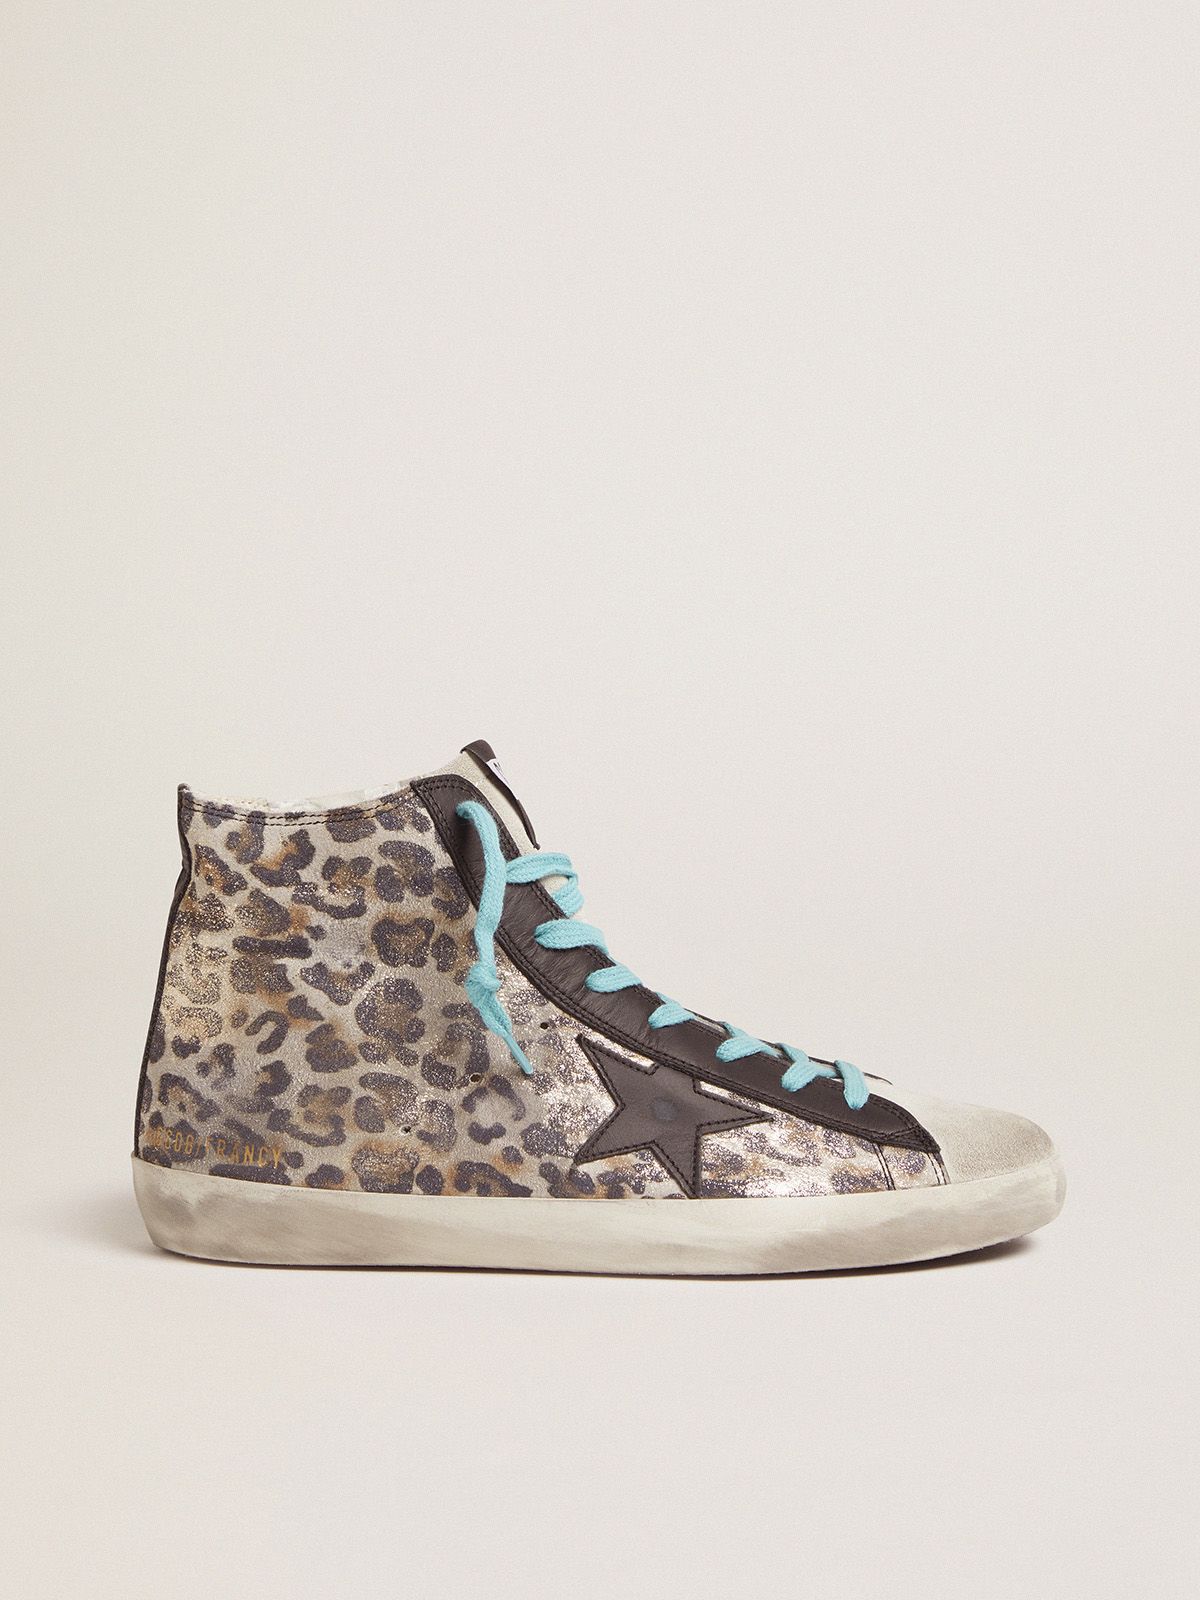 golden goose with Leopard-print laces Francy blue sneakers